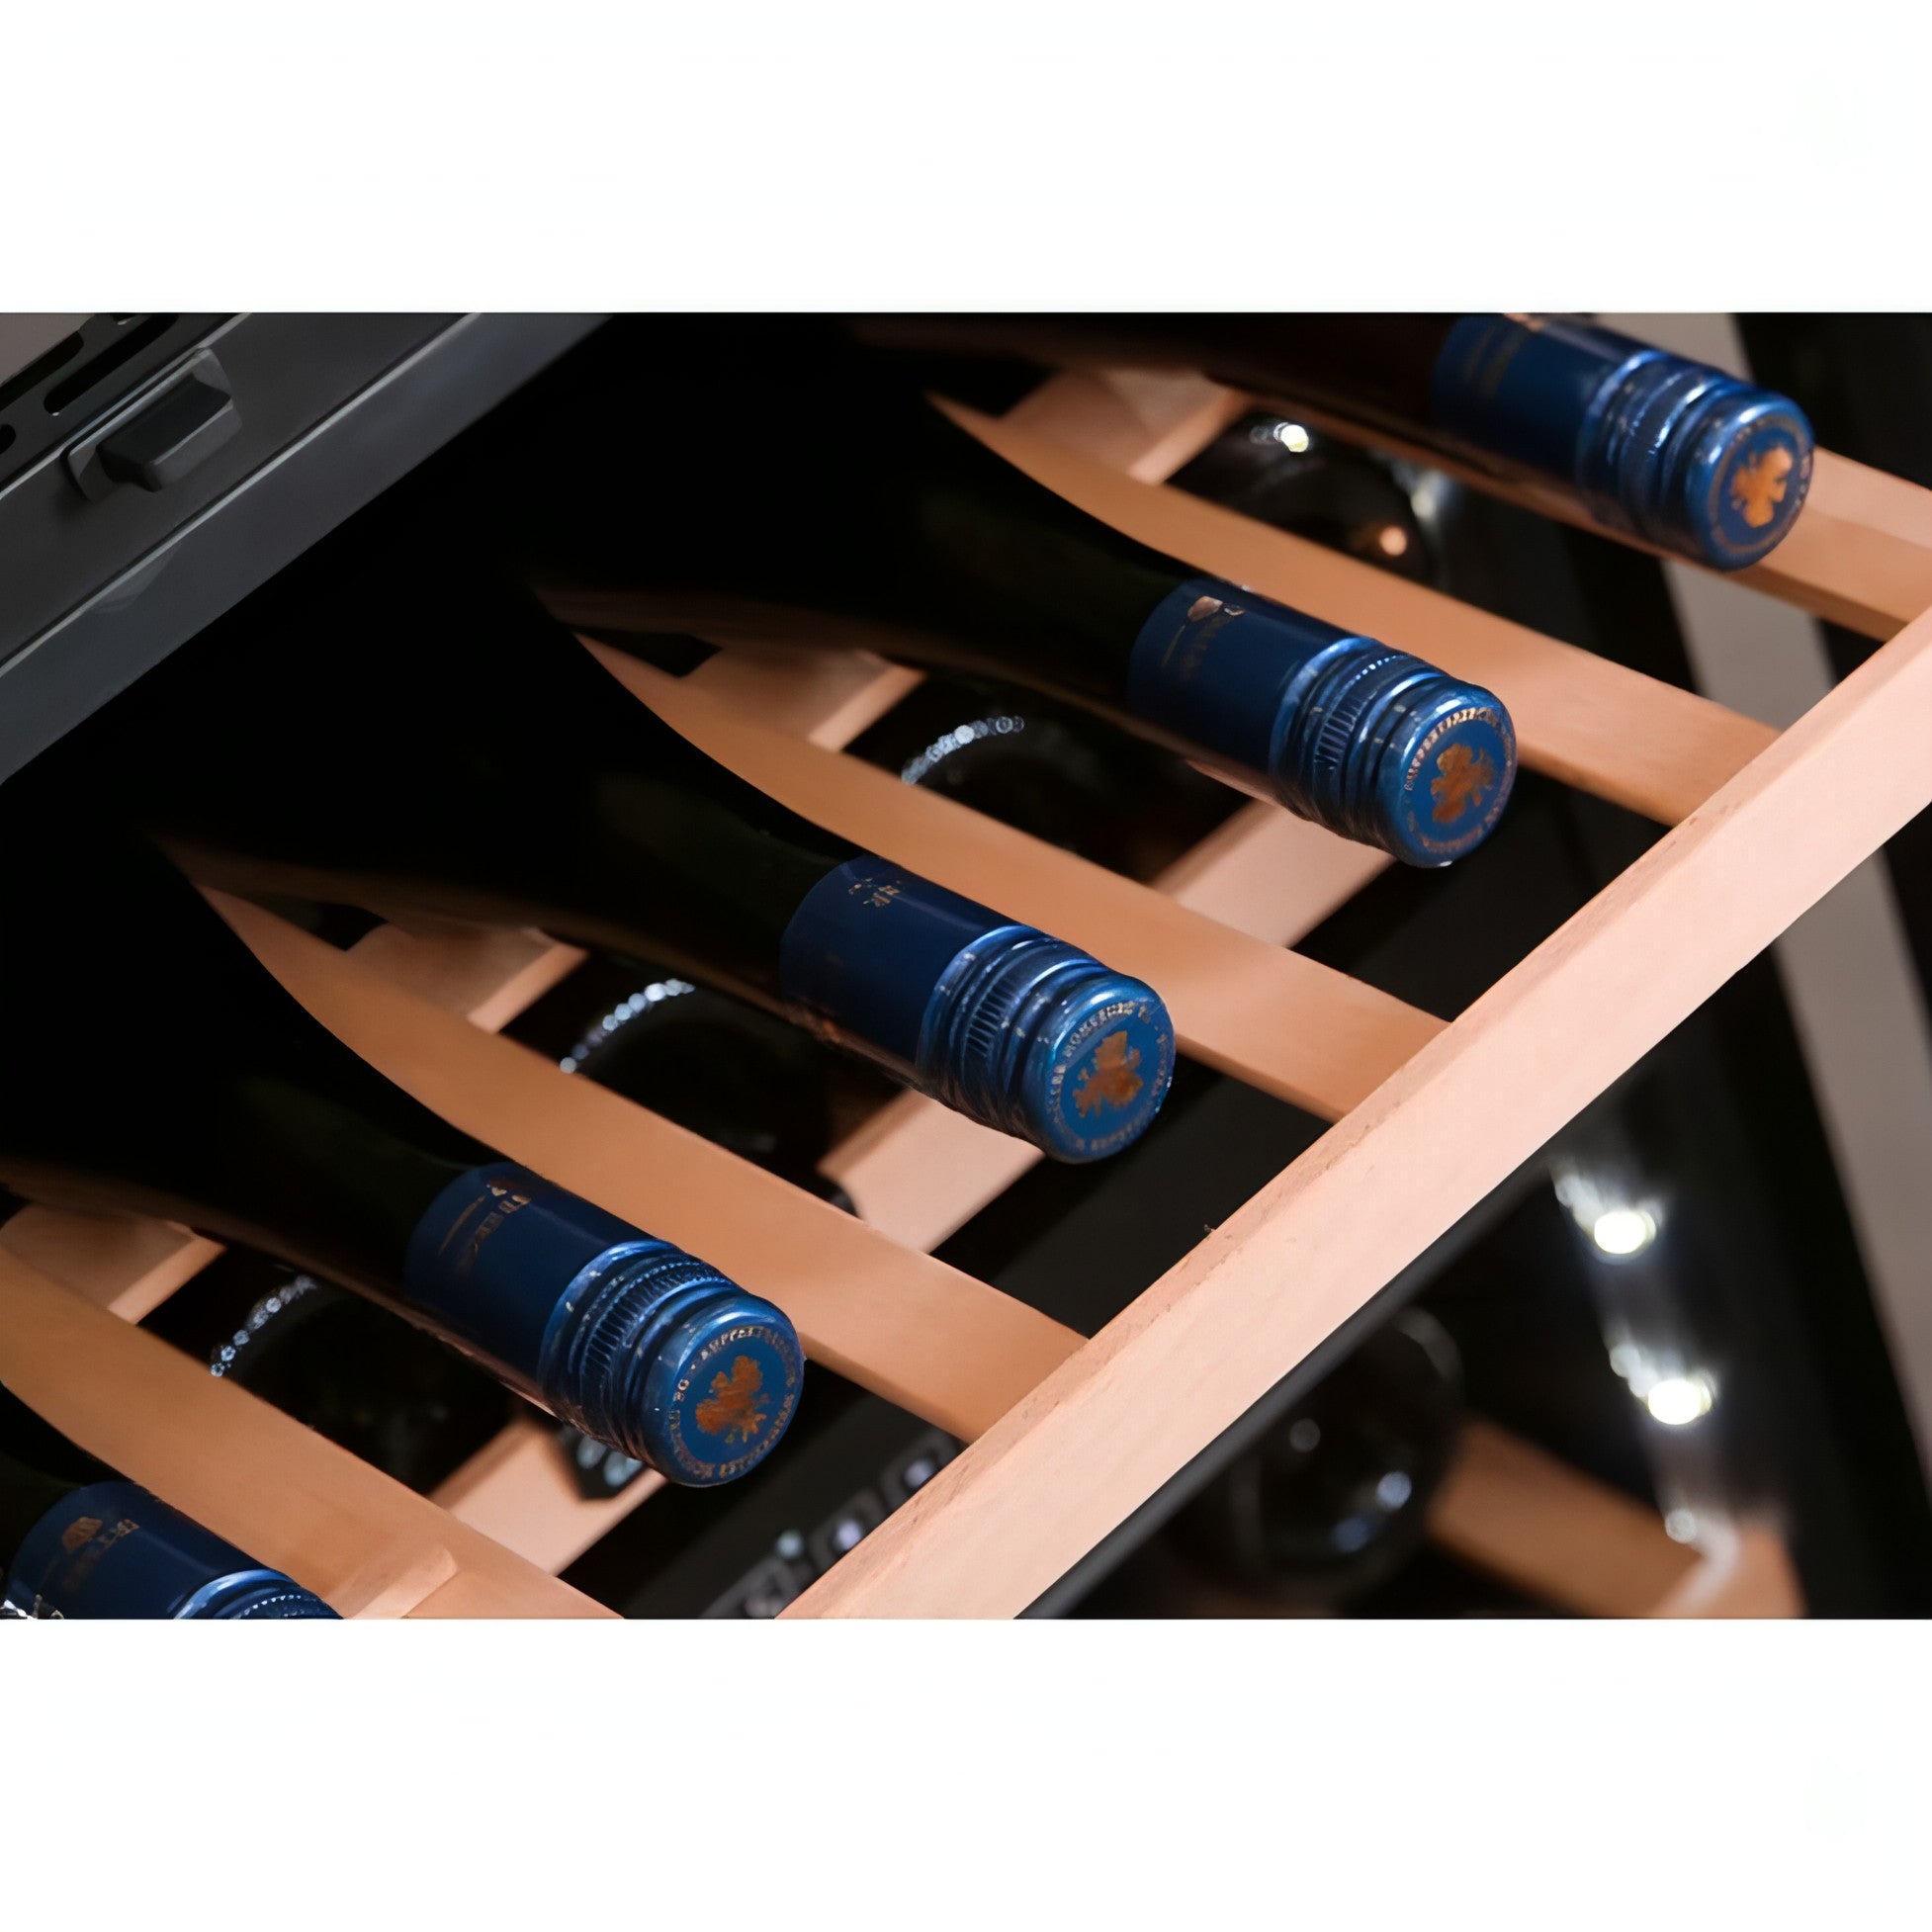 mQuvée - Integrated Wine Cooler - WineKeeper 49D Stainless